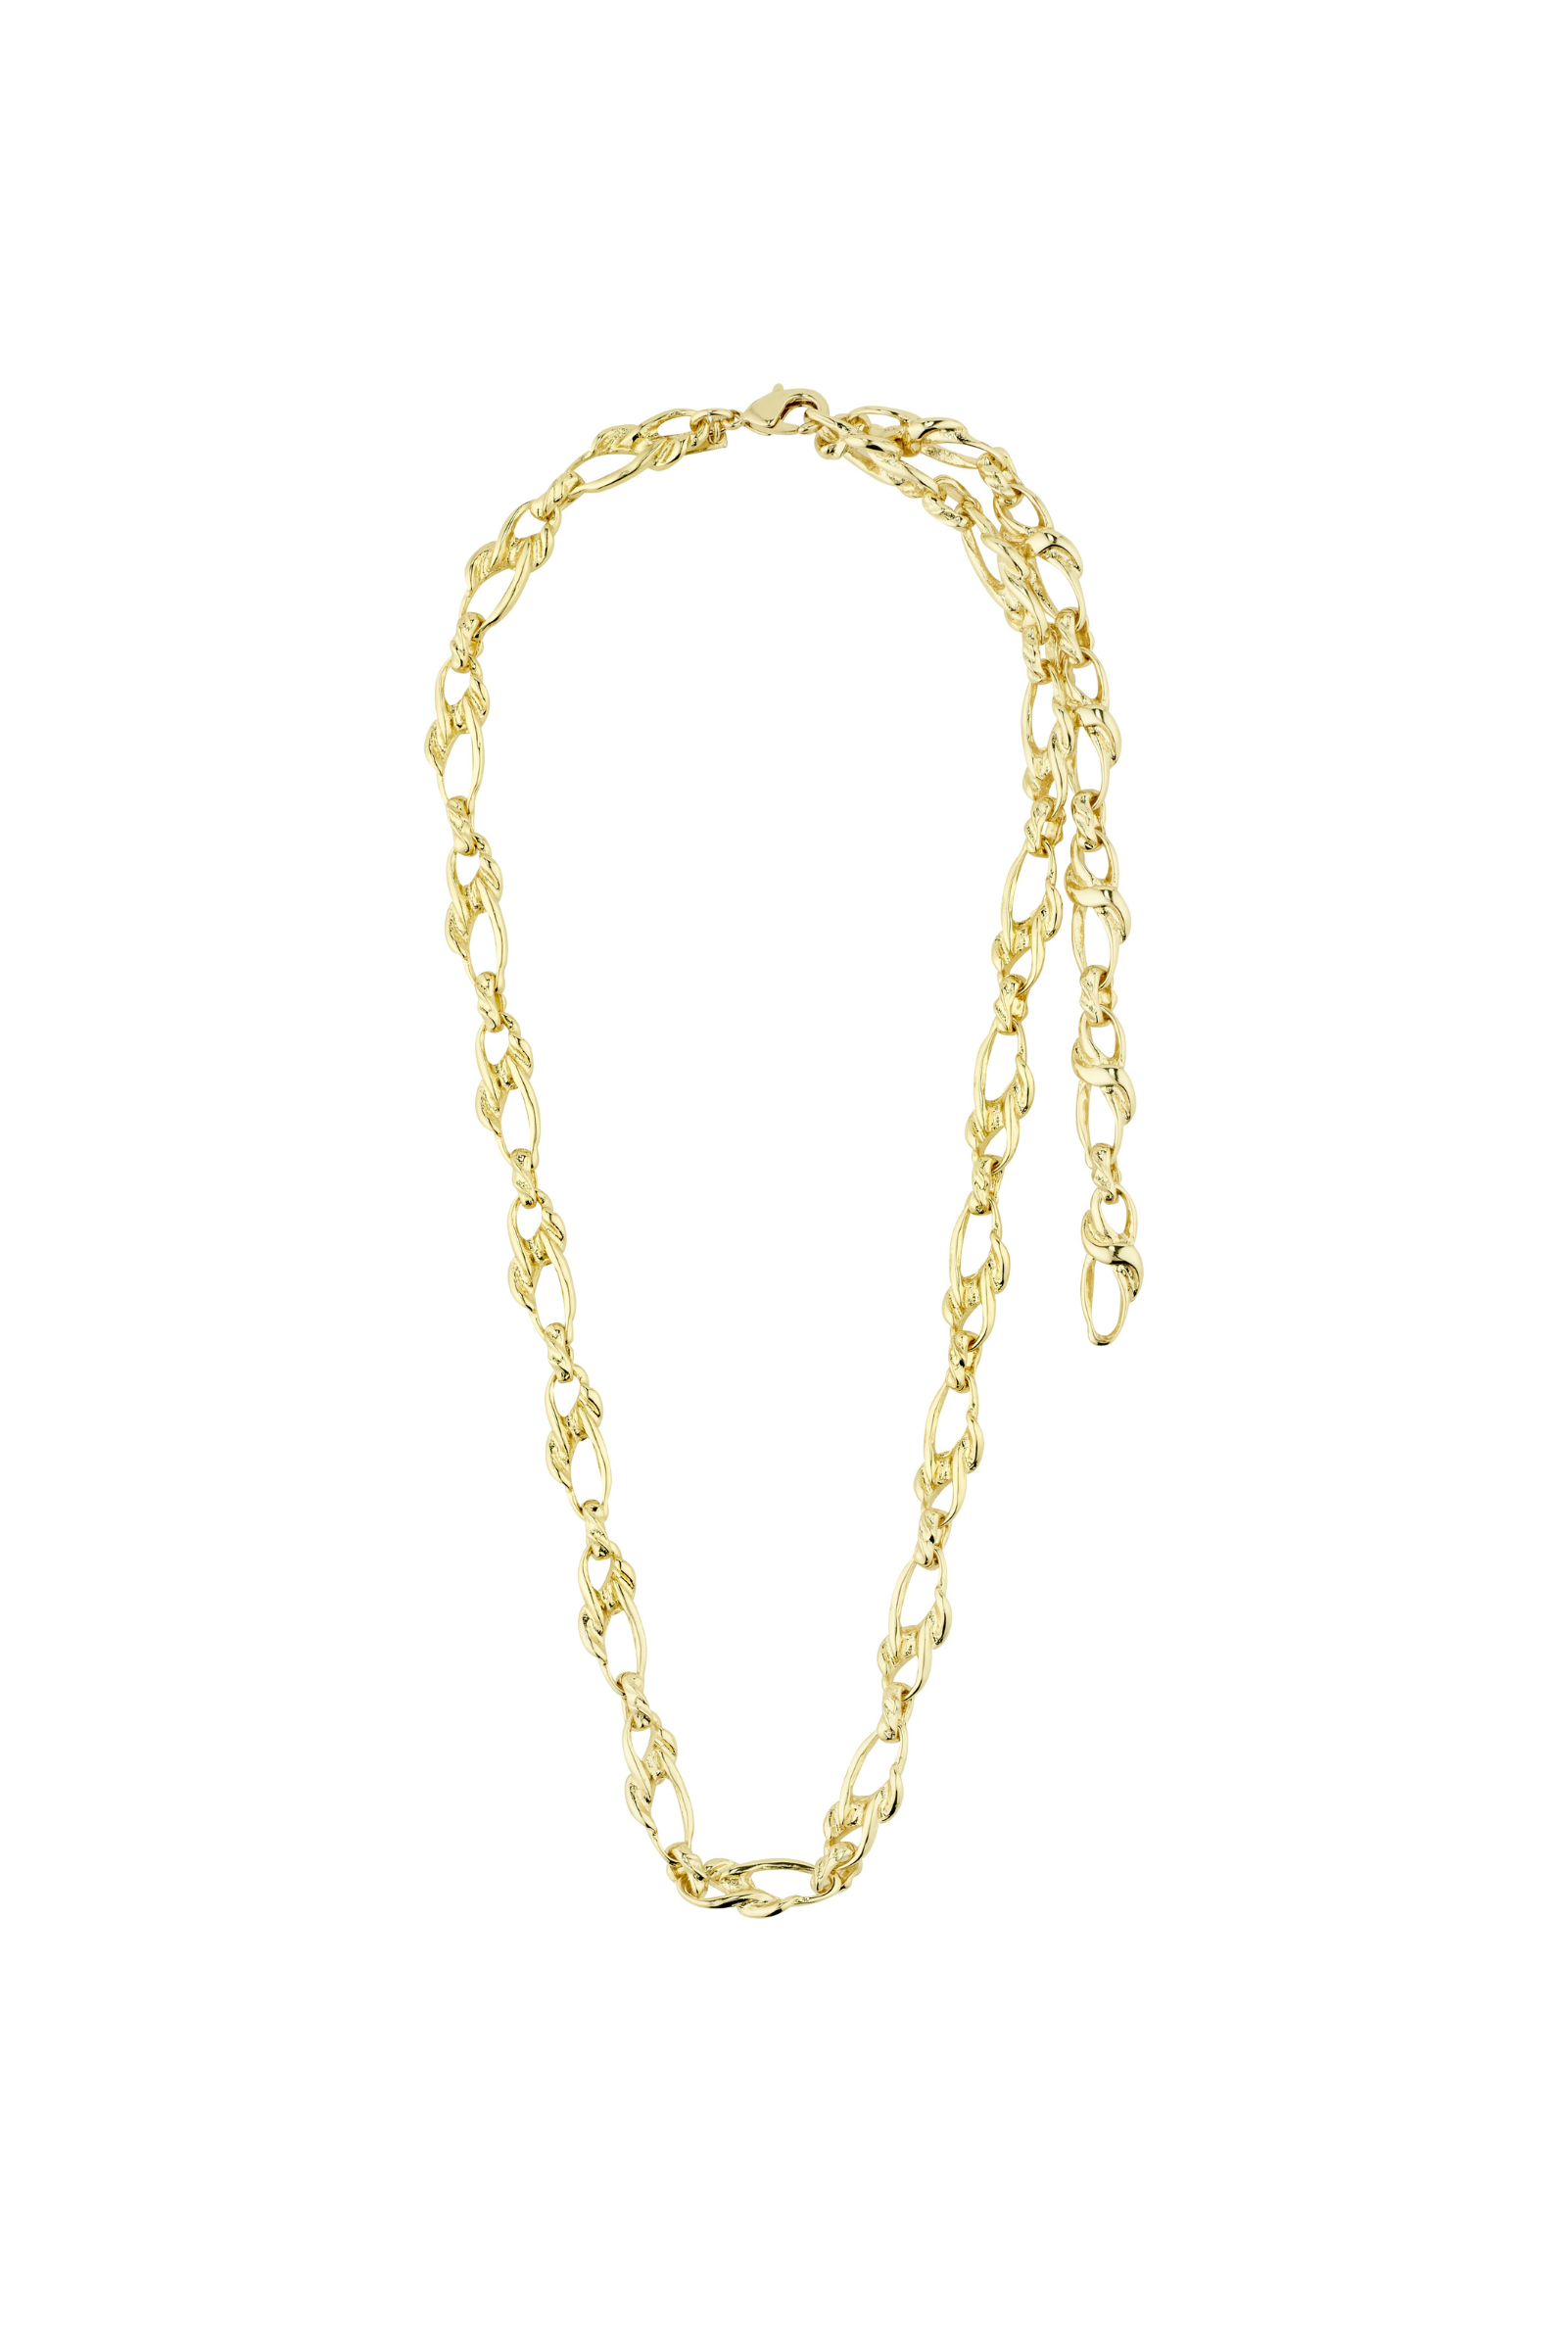 Rani Recycled Necklace - Gold Plated